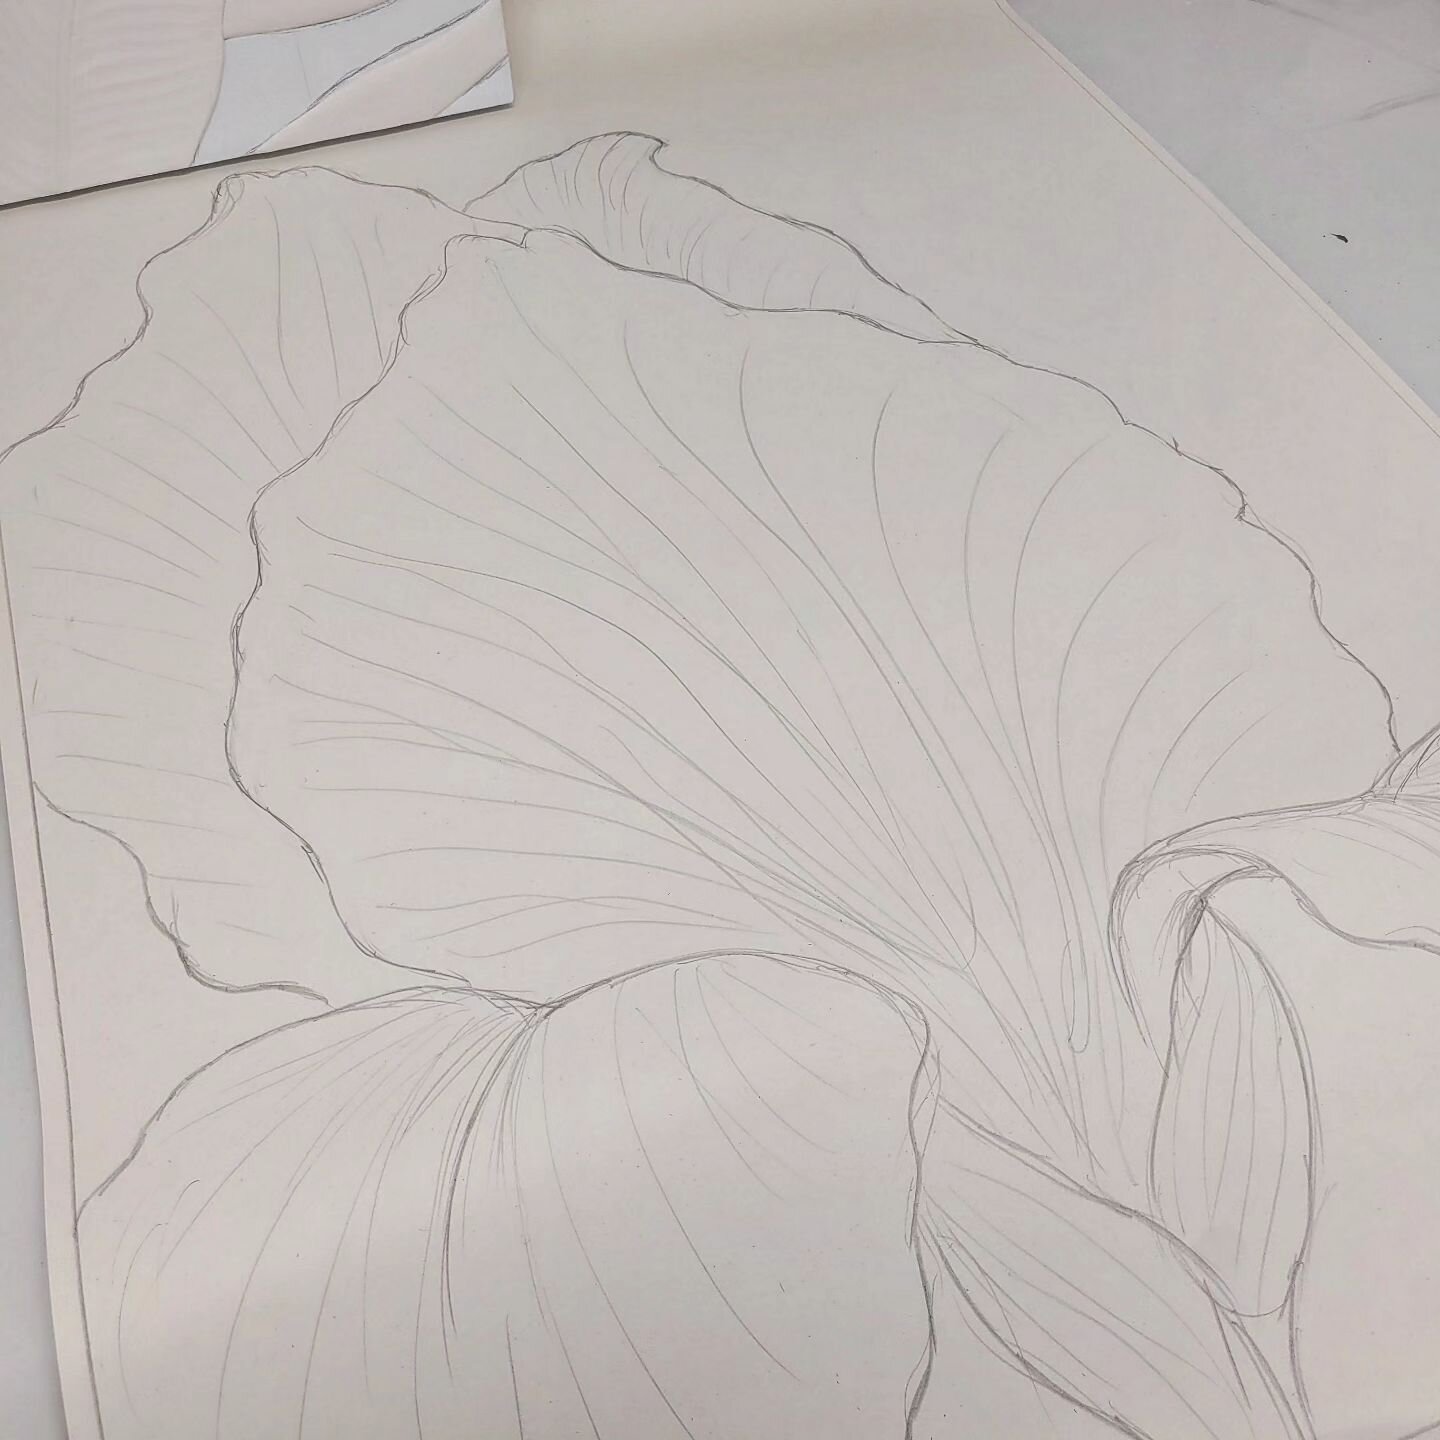 Happy New Year! Starting the year sharing this design sketch for a large Iris sculptural piece that I'm now back to working on. It's grown from just an idea in my mind to a nearly completed piece of art... here's hoping that 2024 will bring more grow